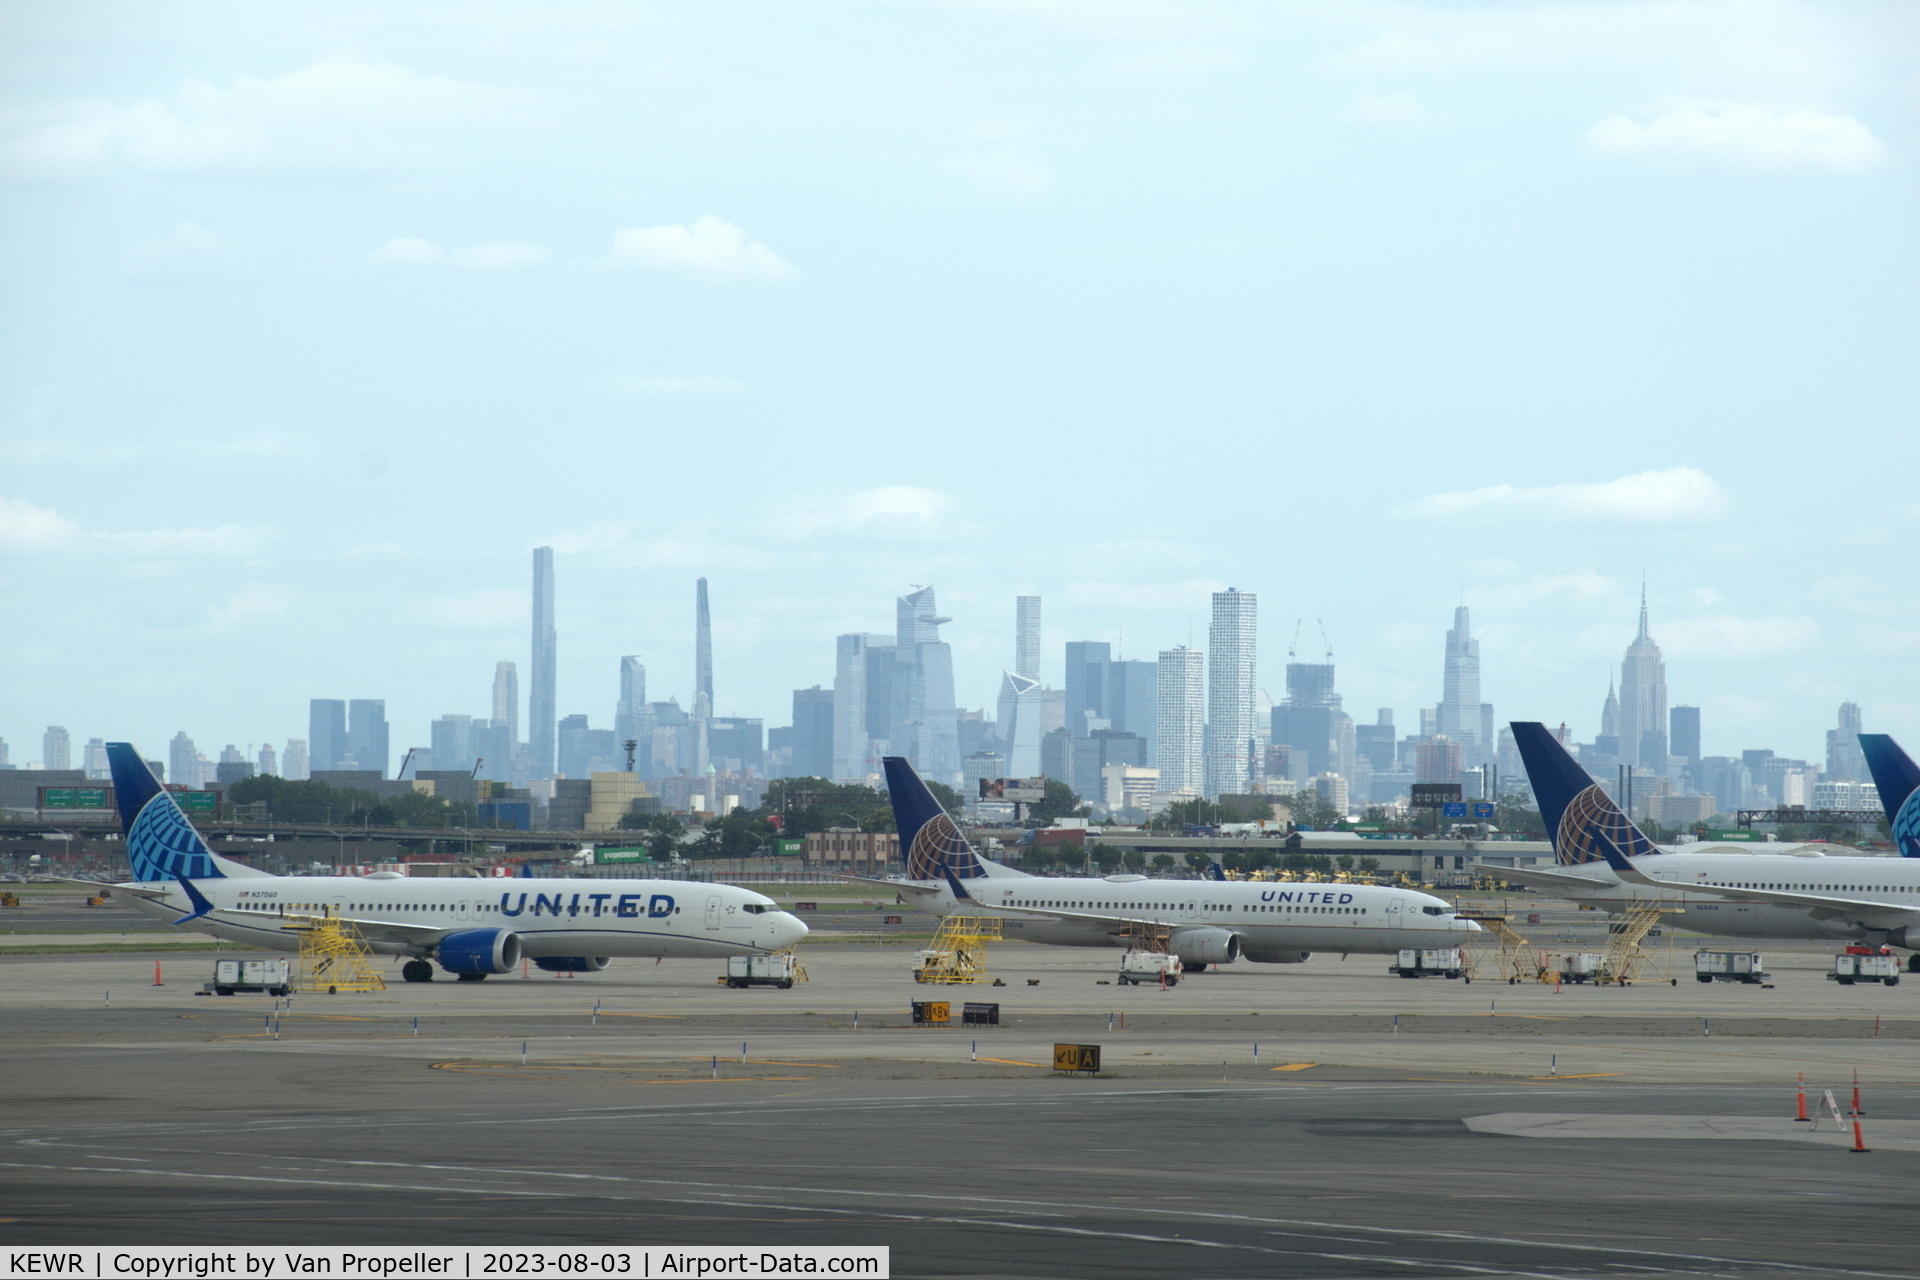 Newark Liberty International Airport (EWR) - View from the United Airlines terminal with Manhattan in the background